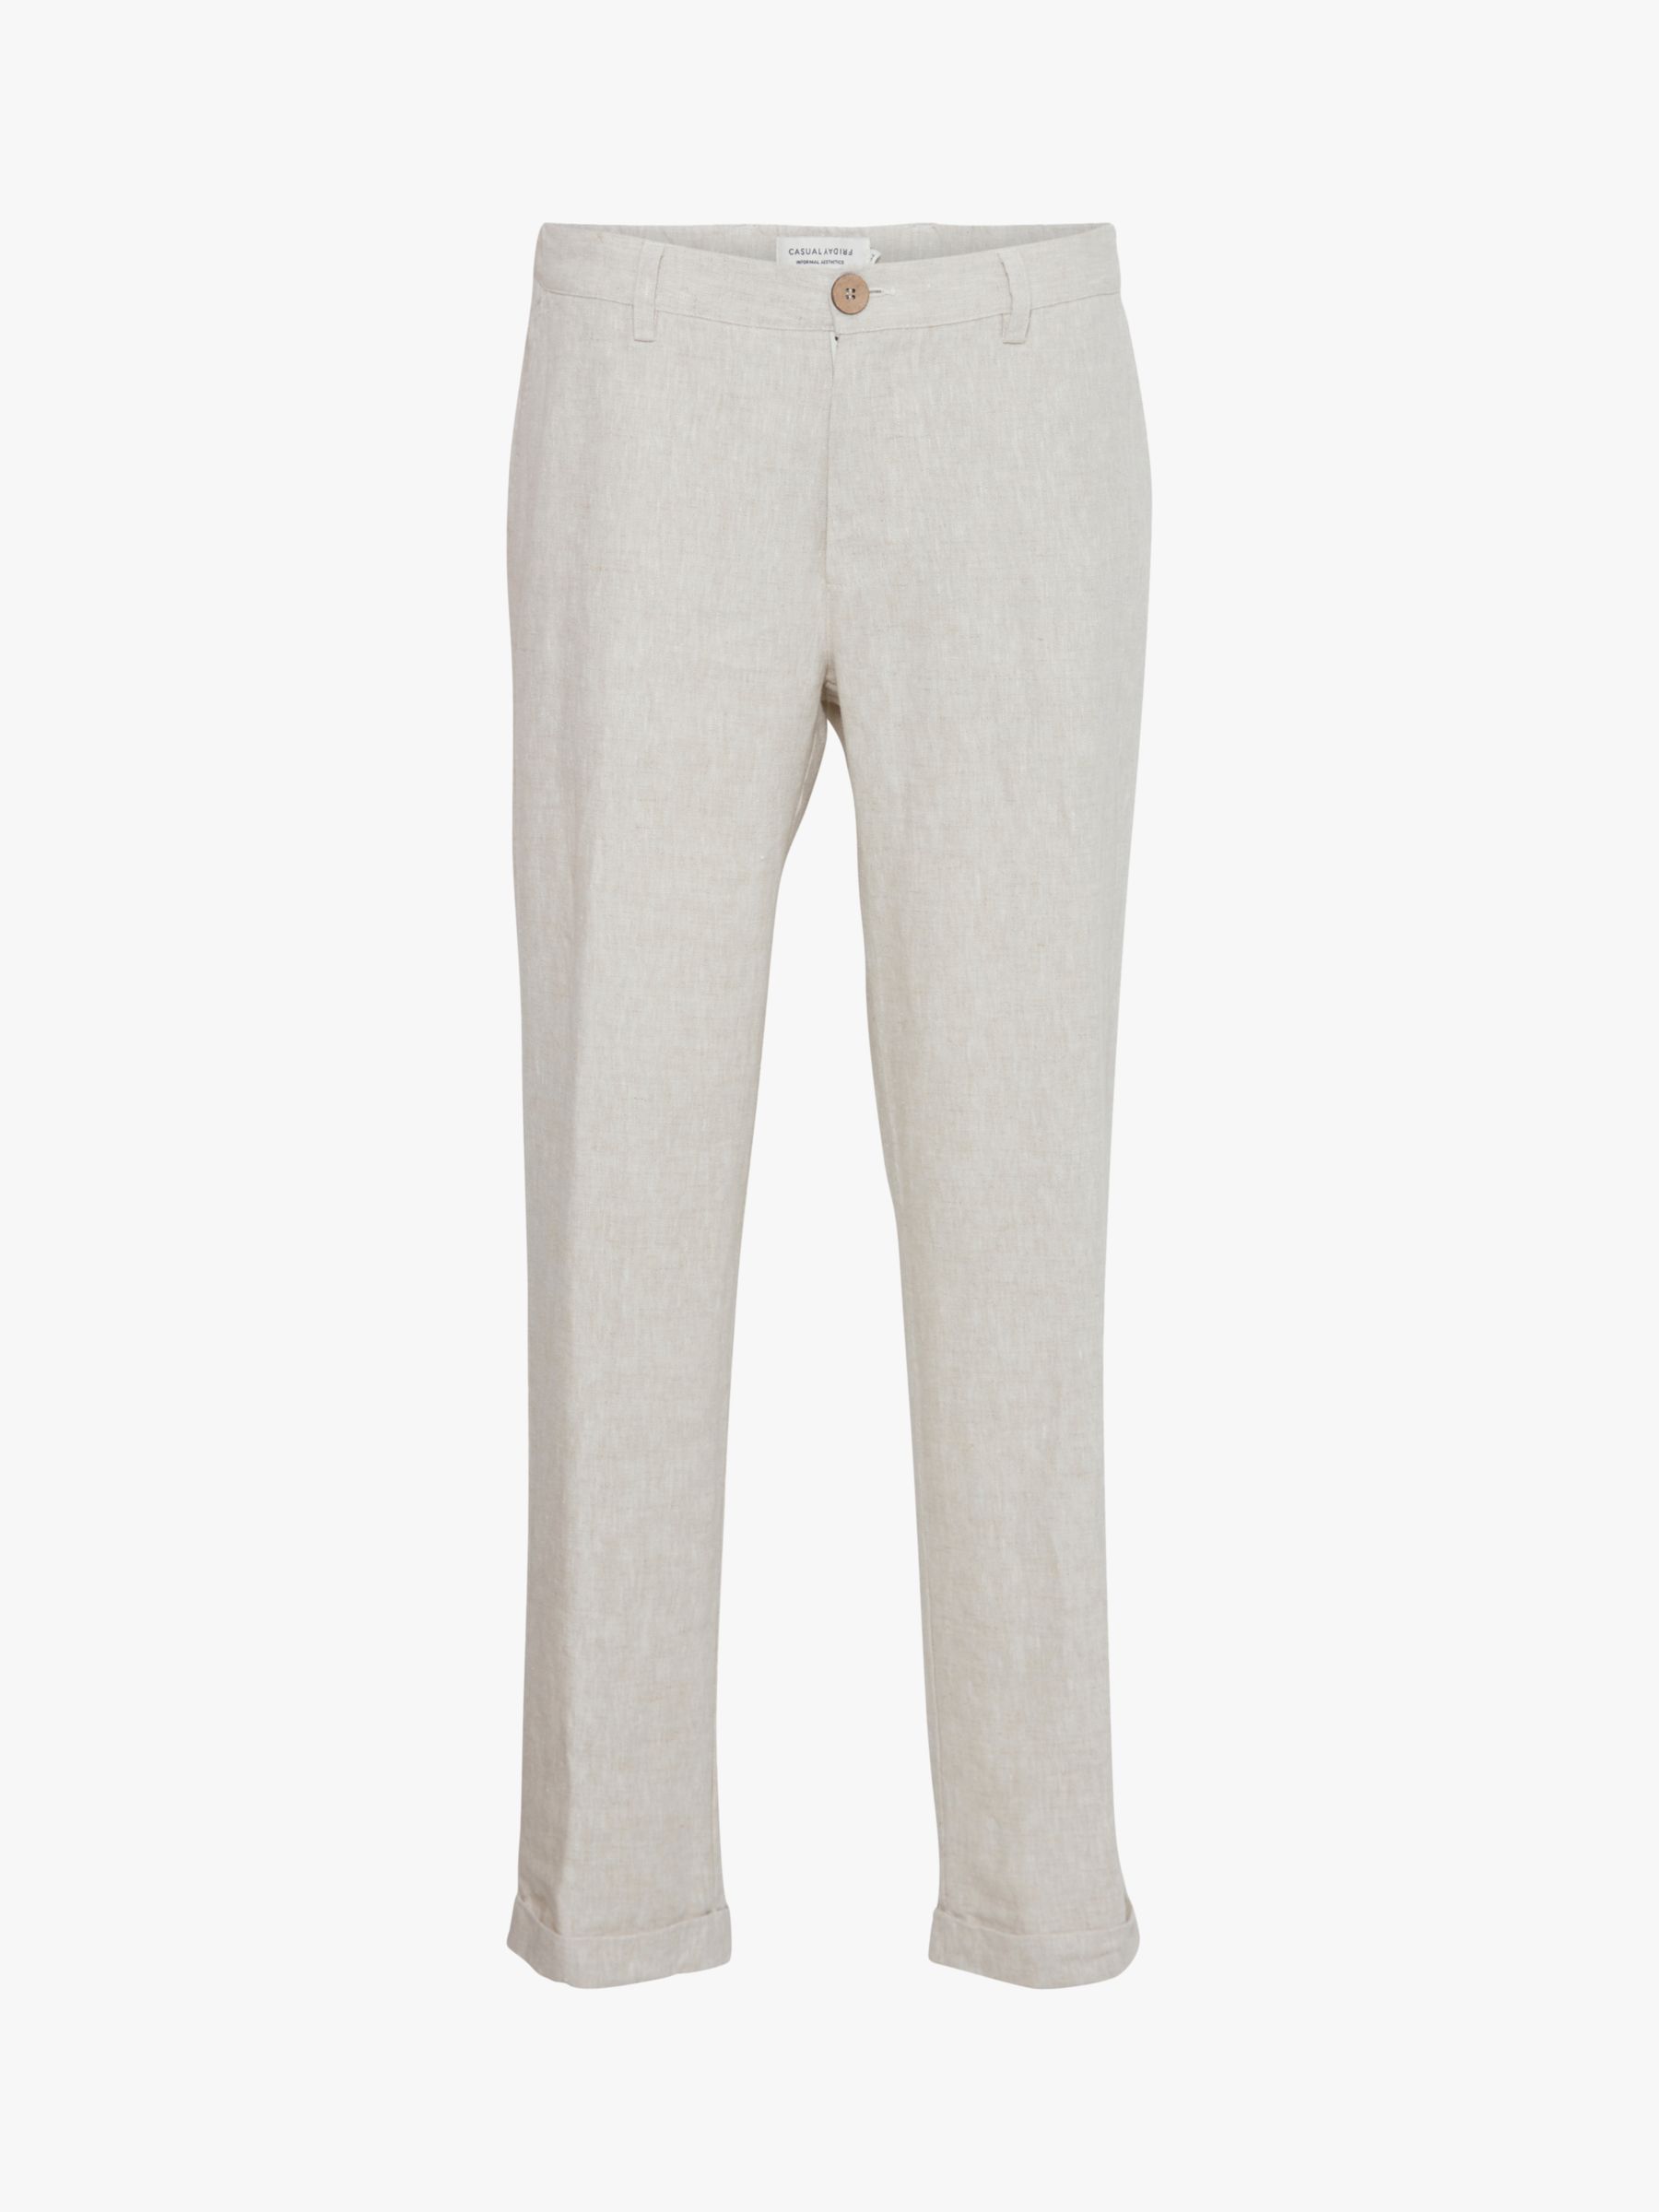 Casual Friday Pandrup Regular Fit Stretch Trousers, Chateau Gray, 28R